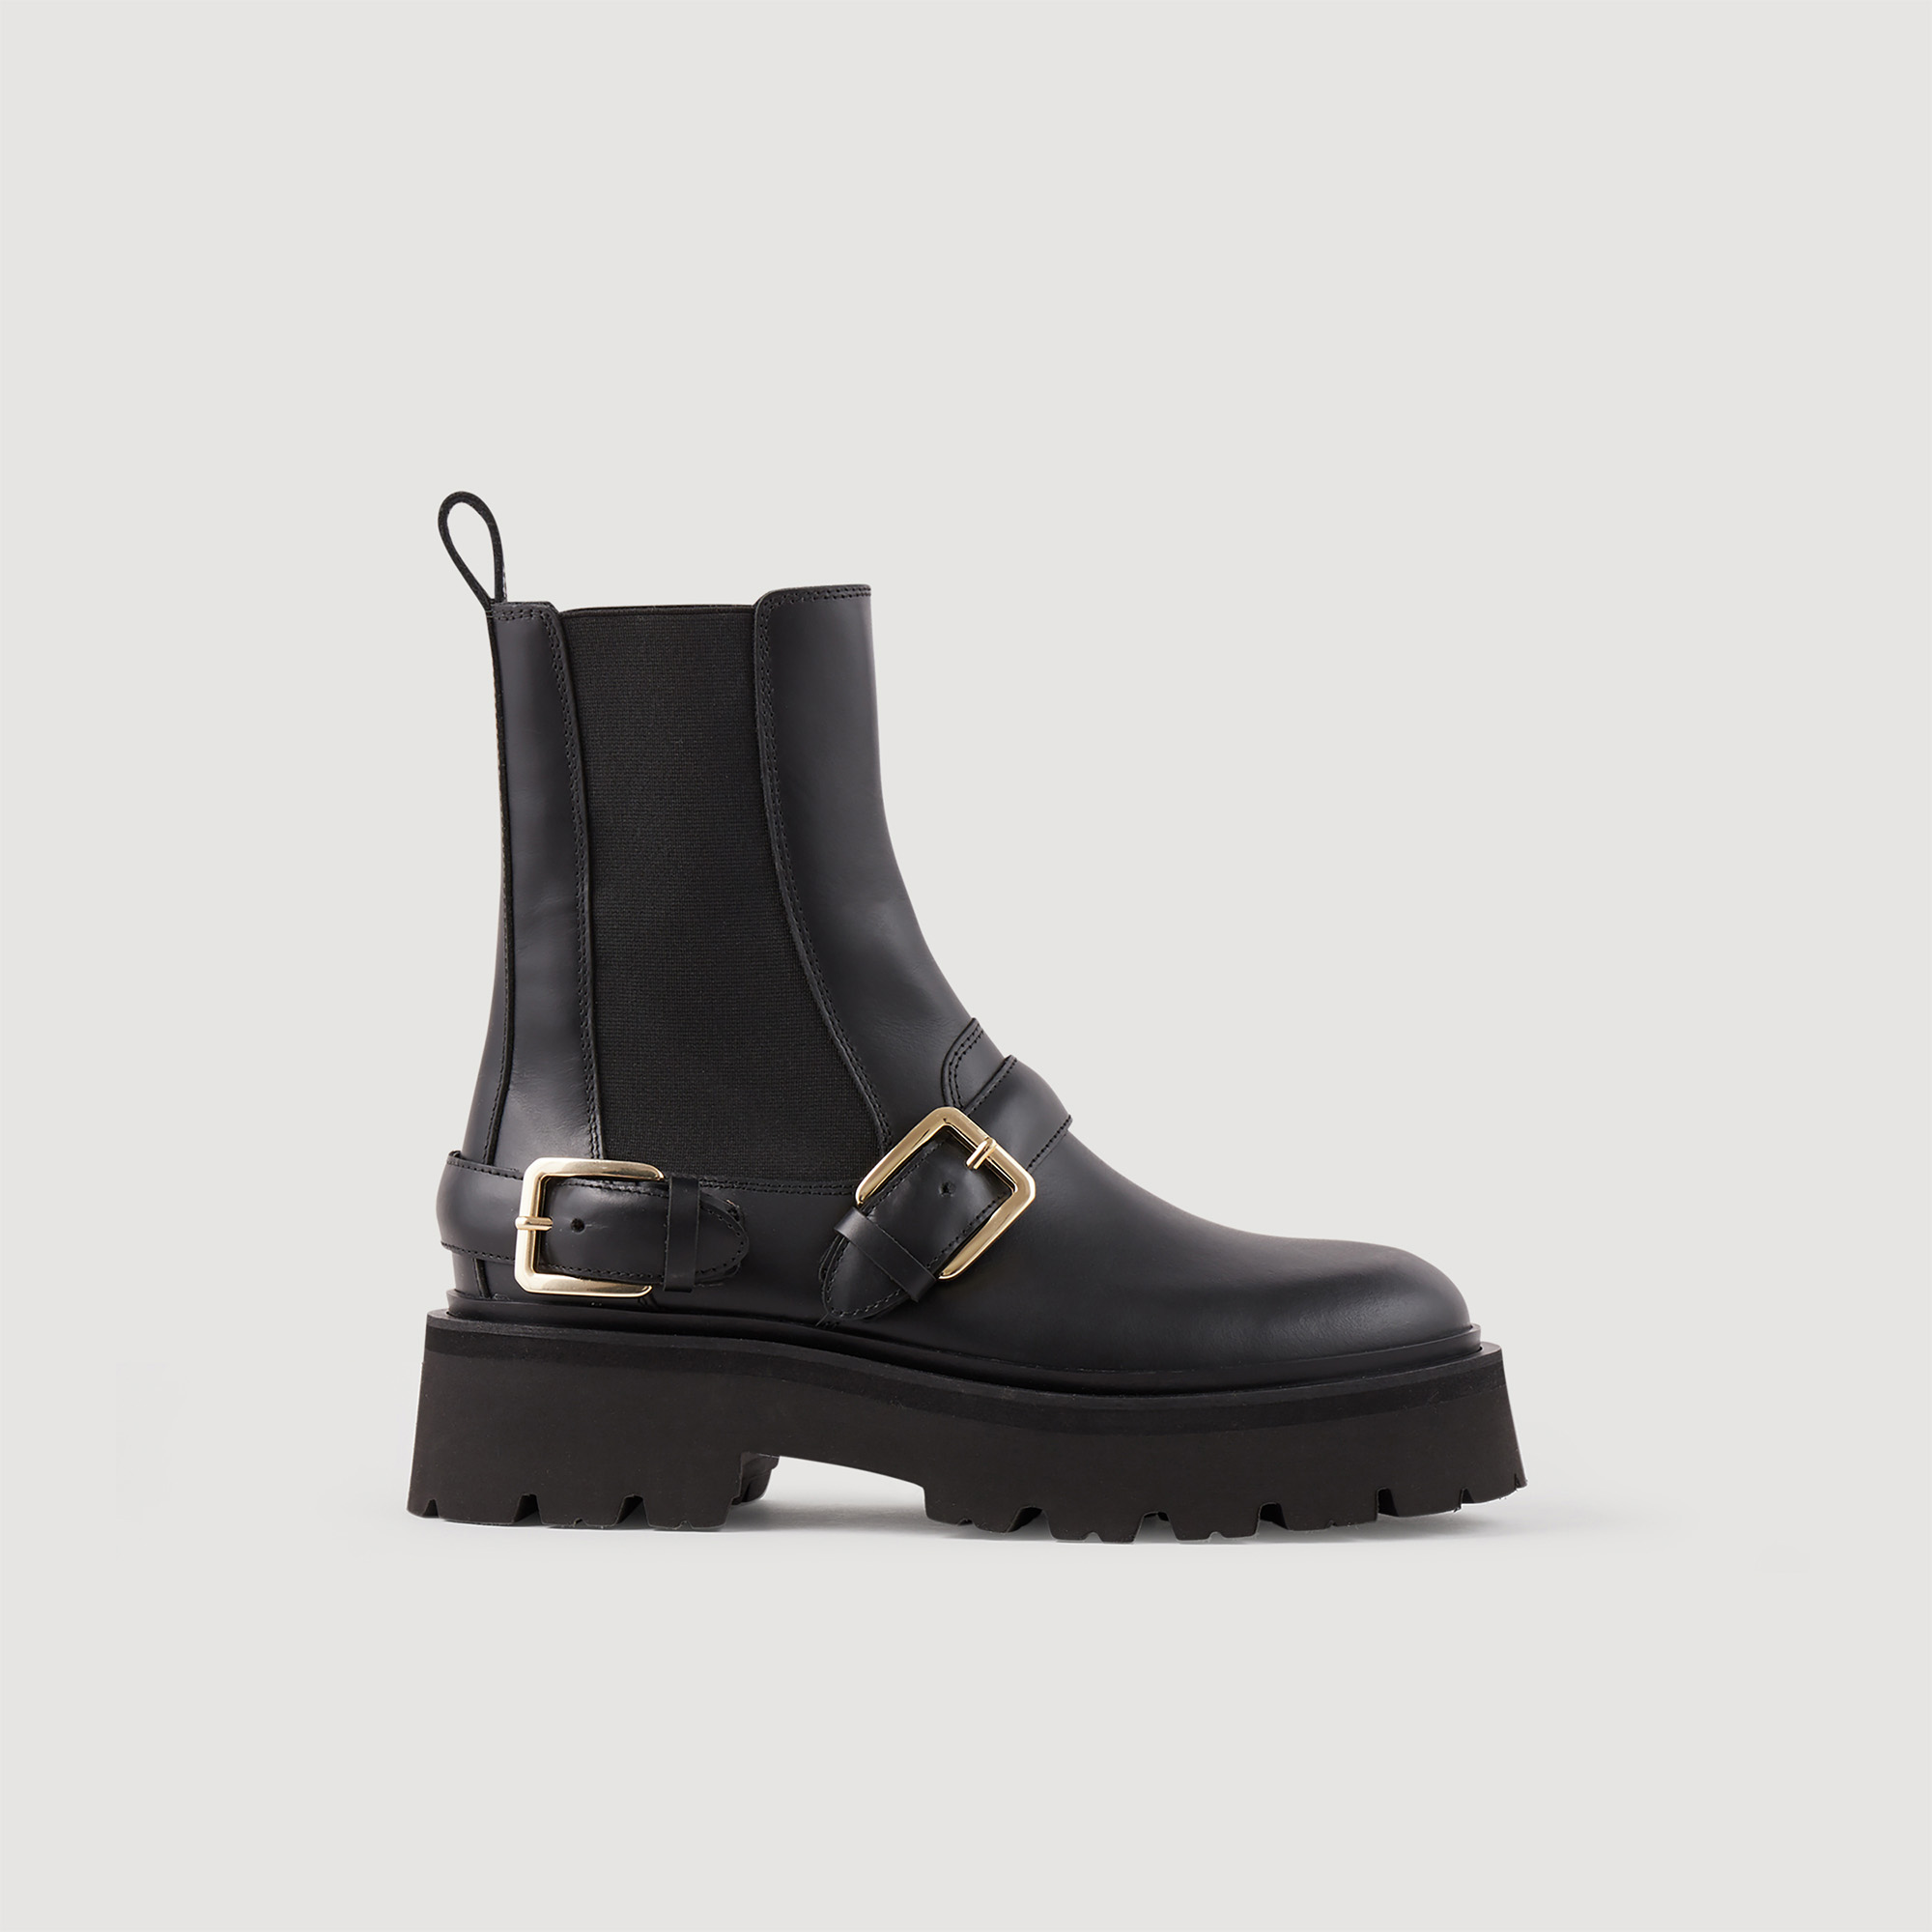 Sandro ethylene vinyl acetate Accessories: pig Leather: Leather, biker-style ankle boots with round toes, chunky platform soles, elasticated panels at the sides and trimmed with straps with metal buckles